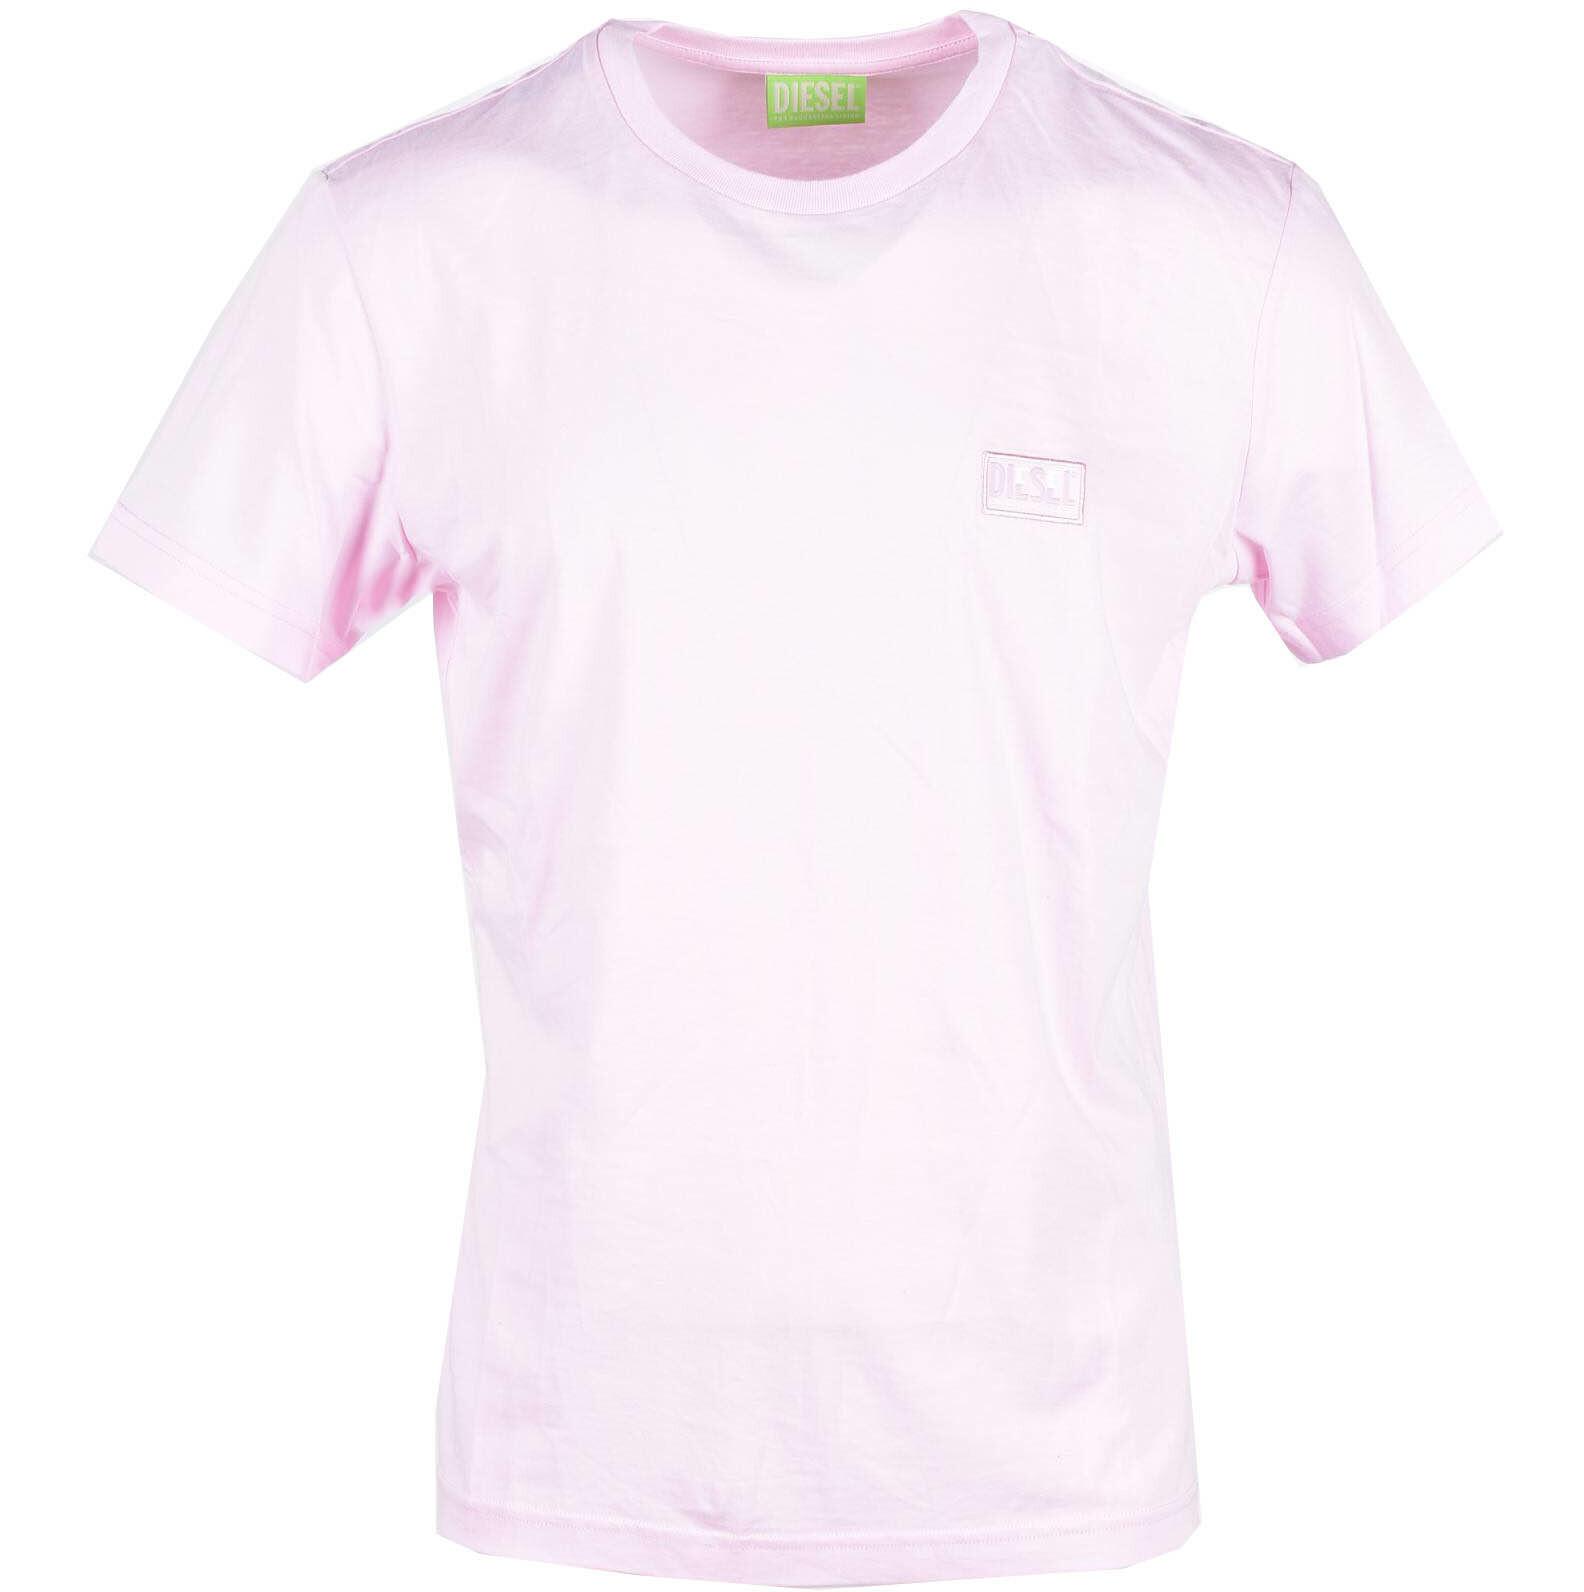 Diesel Pink T-shirt S at FORZIERI